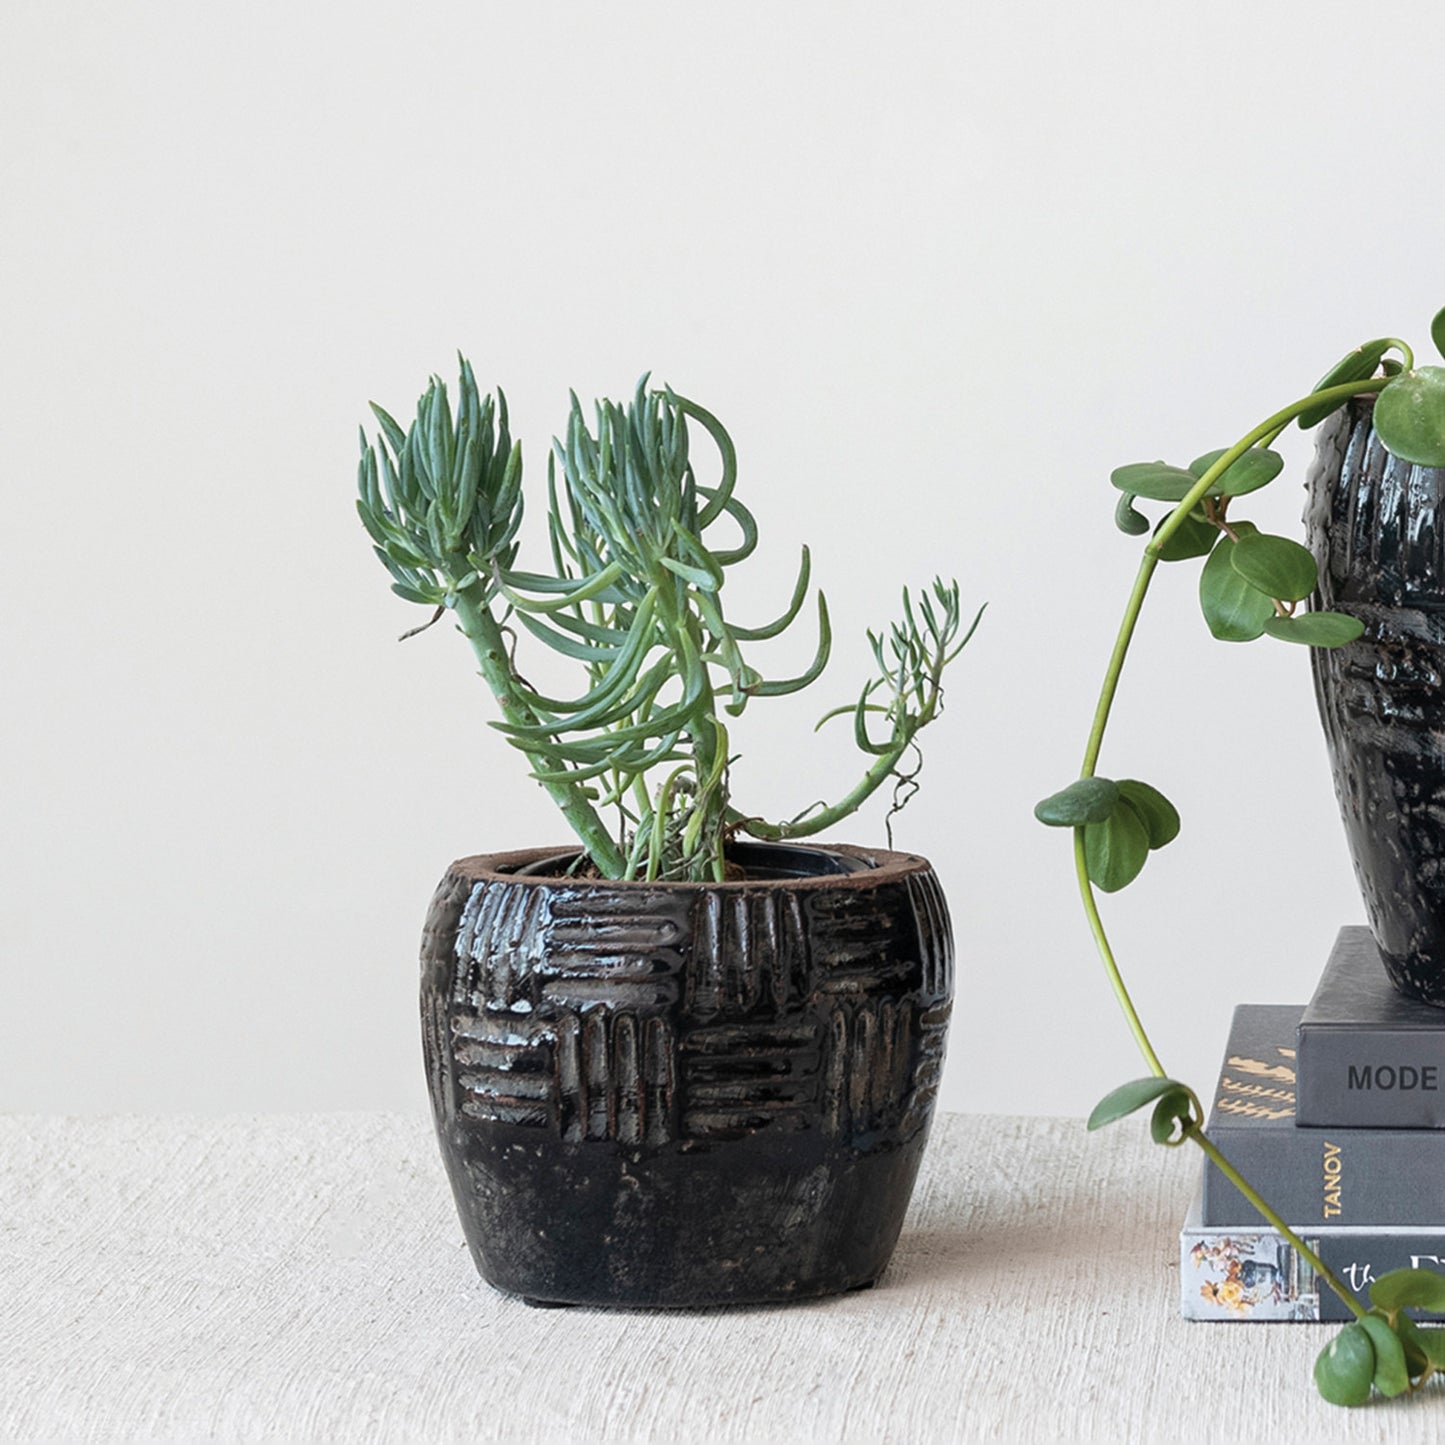 Embossed Terra-cotta Planter, Crackle Finish, Distressed Black (Each One Will Vary)